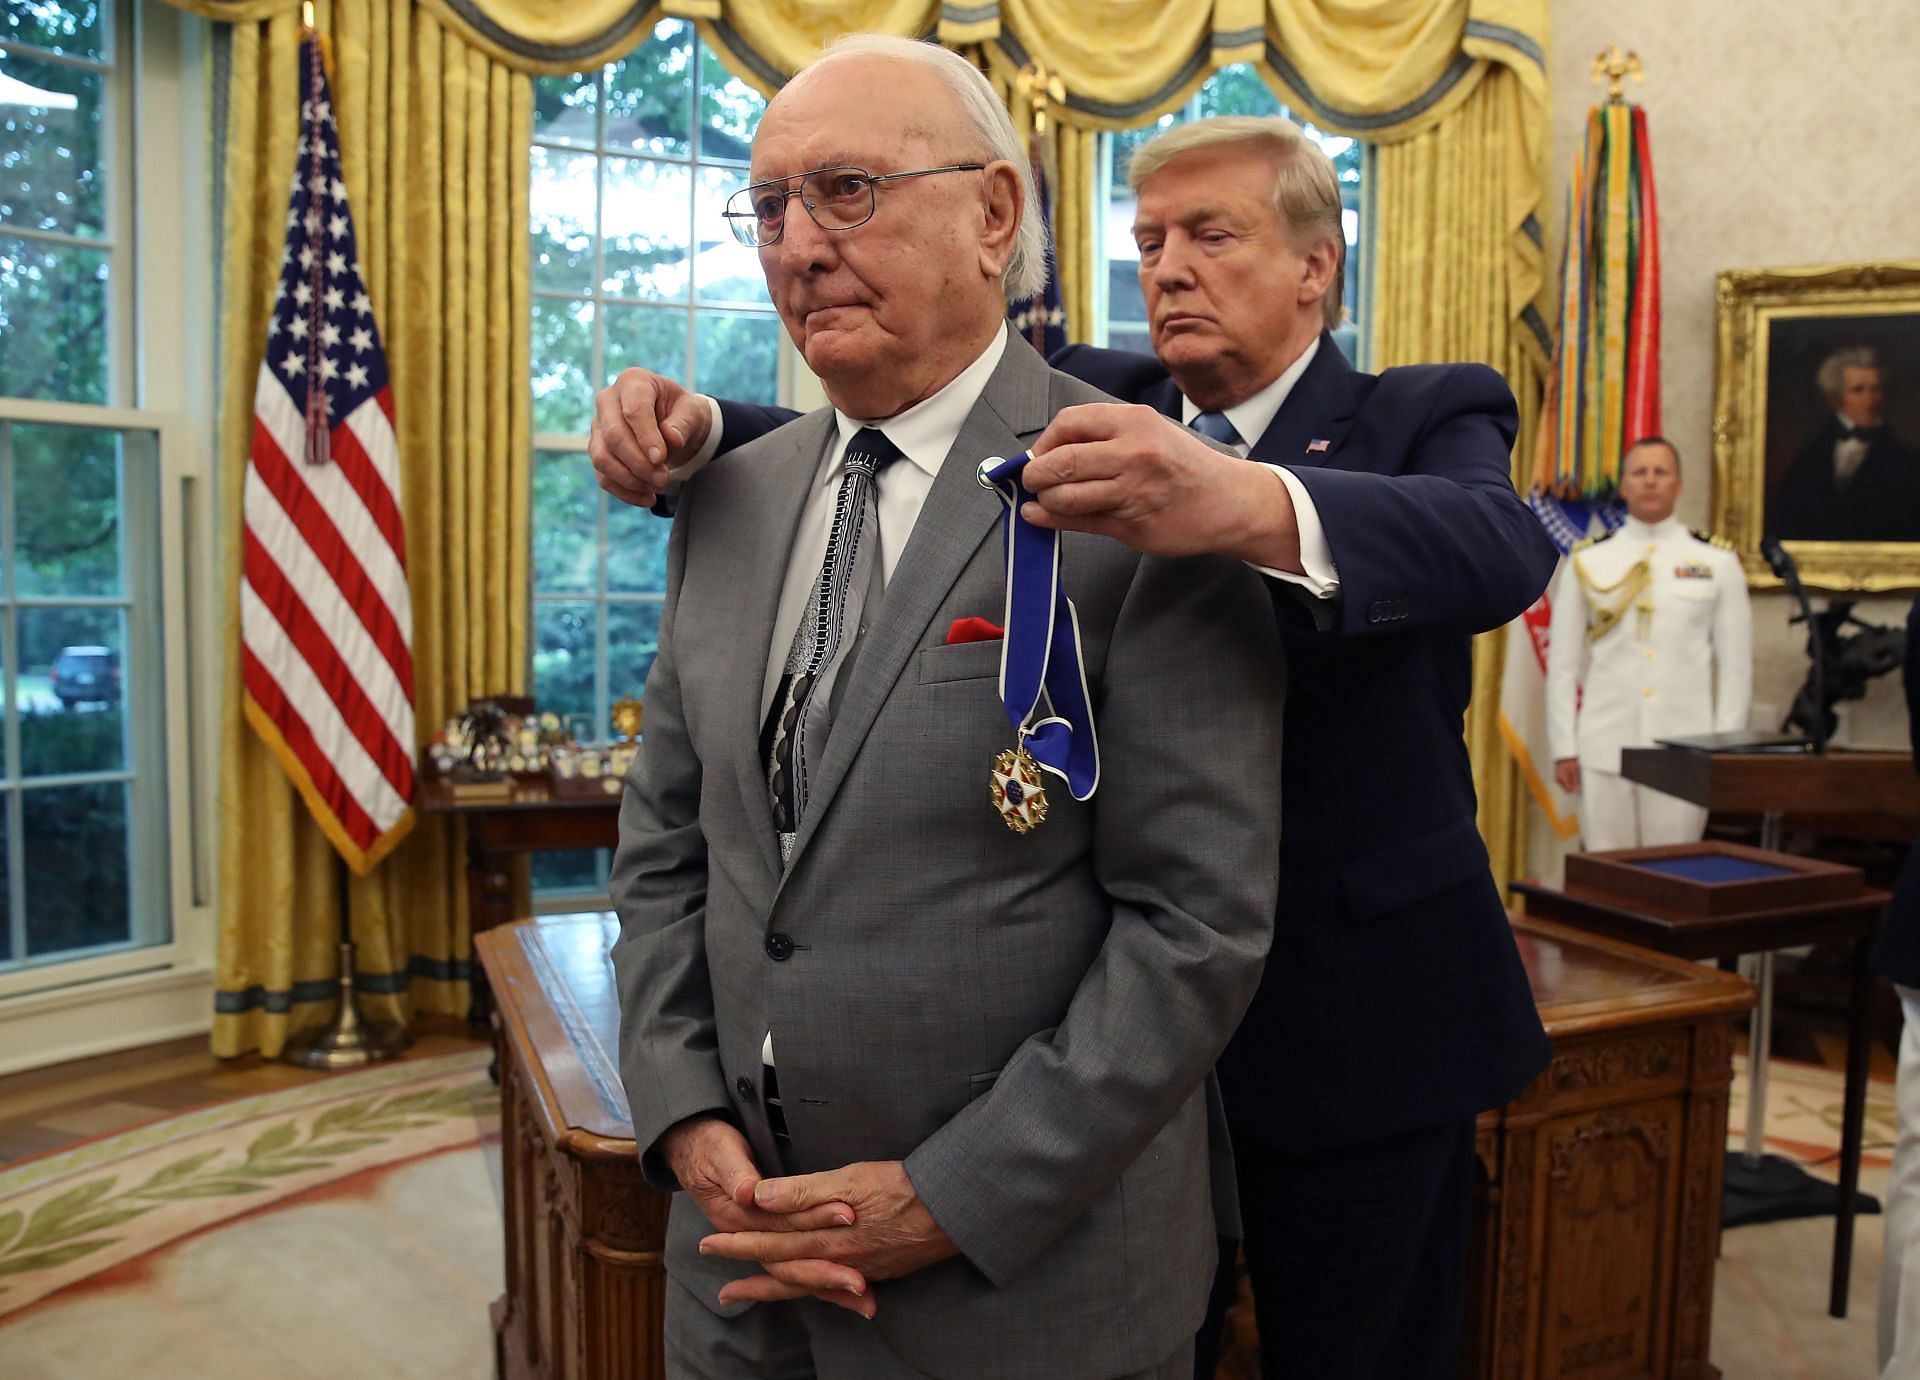 President Donald Trump Presents Medal Of Freedom To NBA Legend Bob Cousy